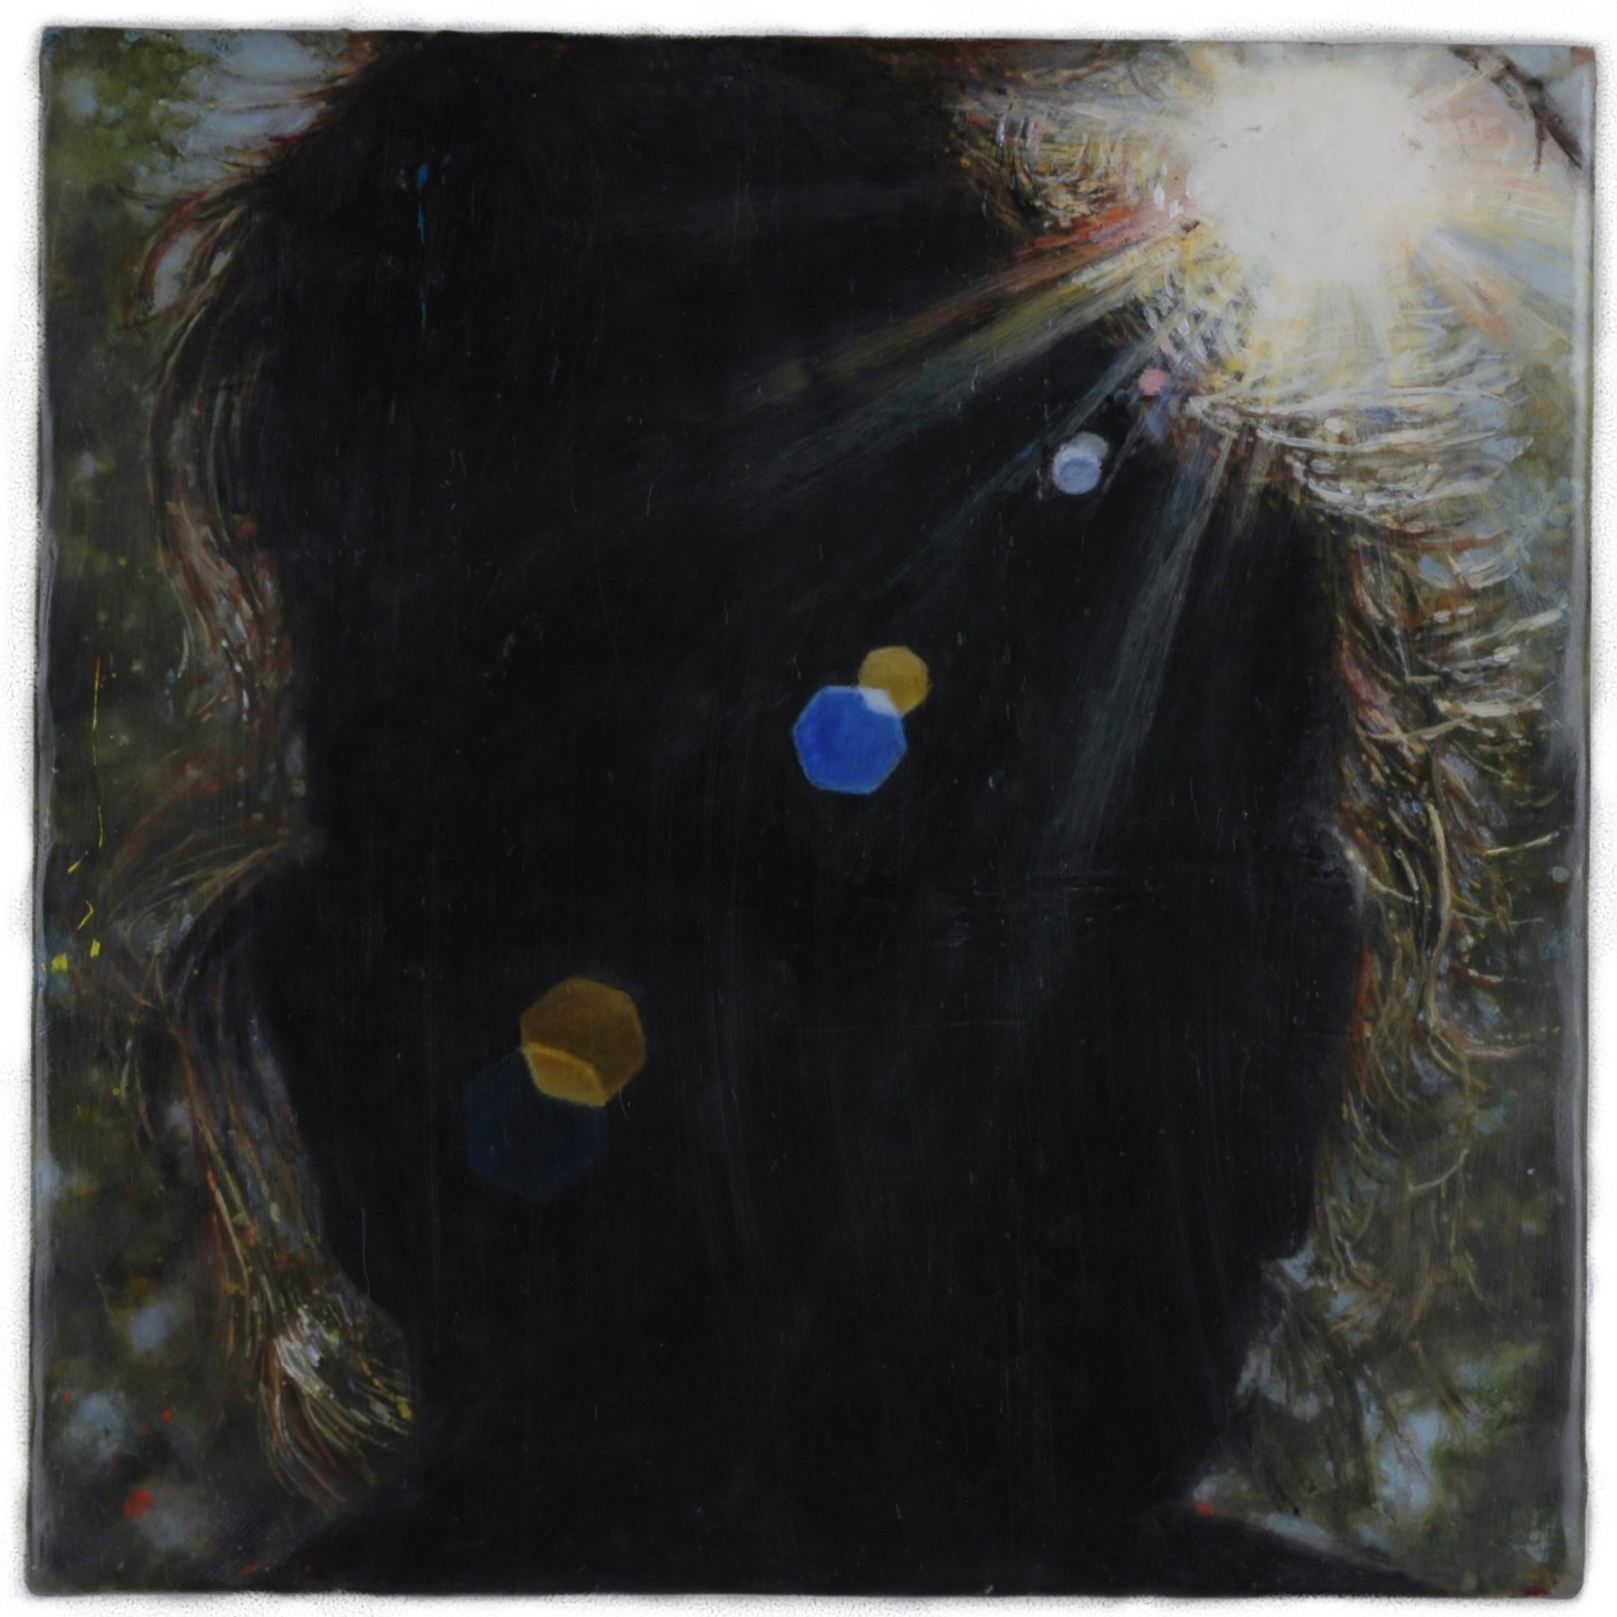   Untitled (Parting), 2014  Encaustic on panel 8" sq. 